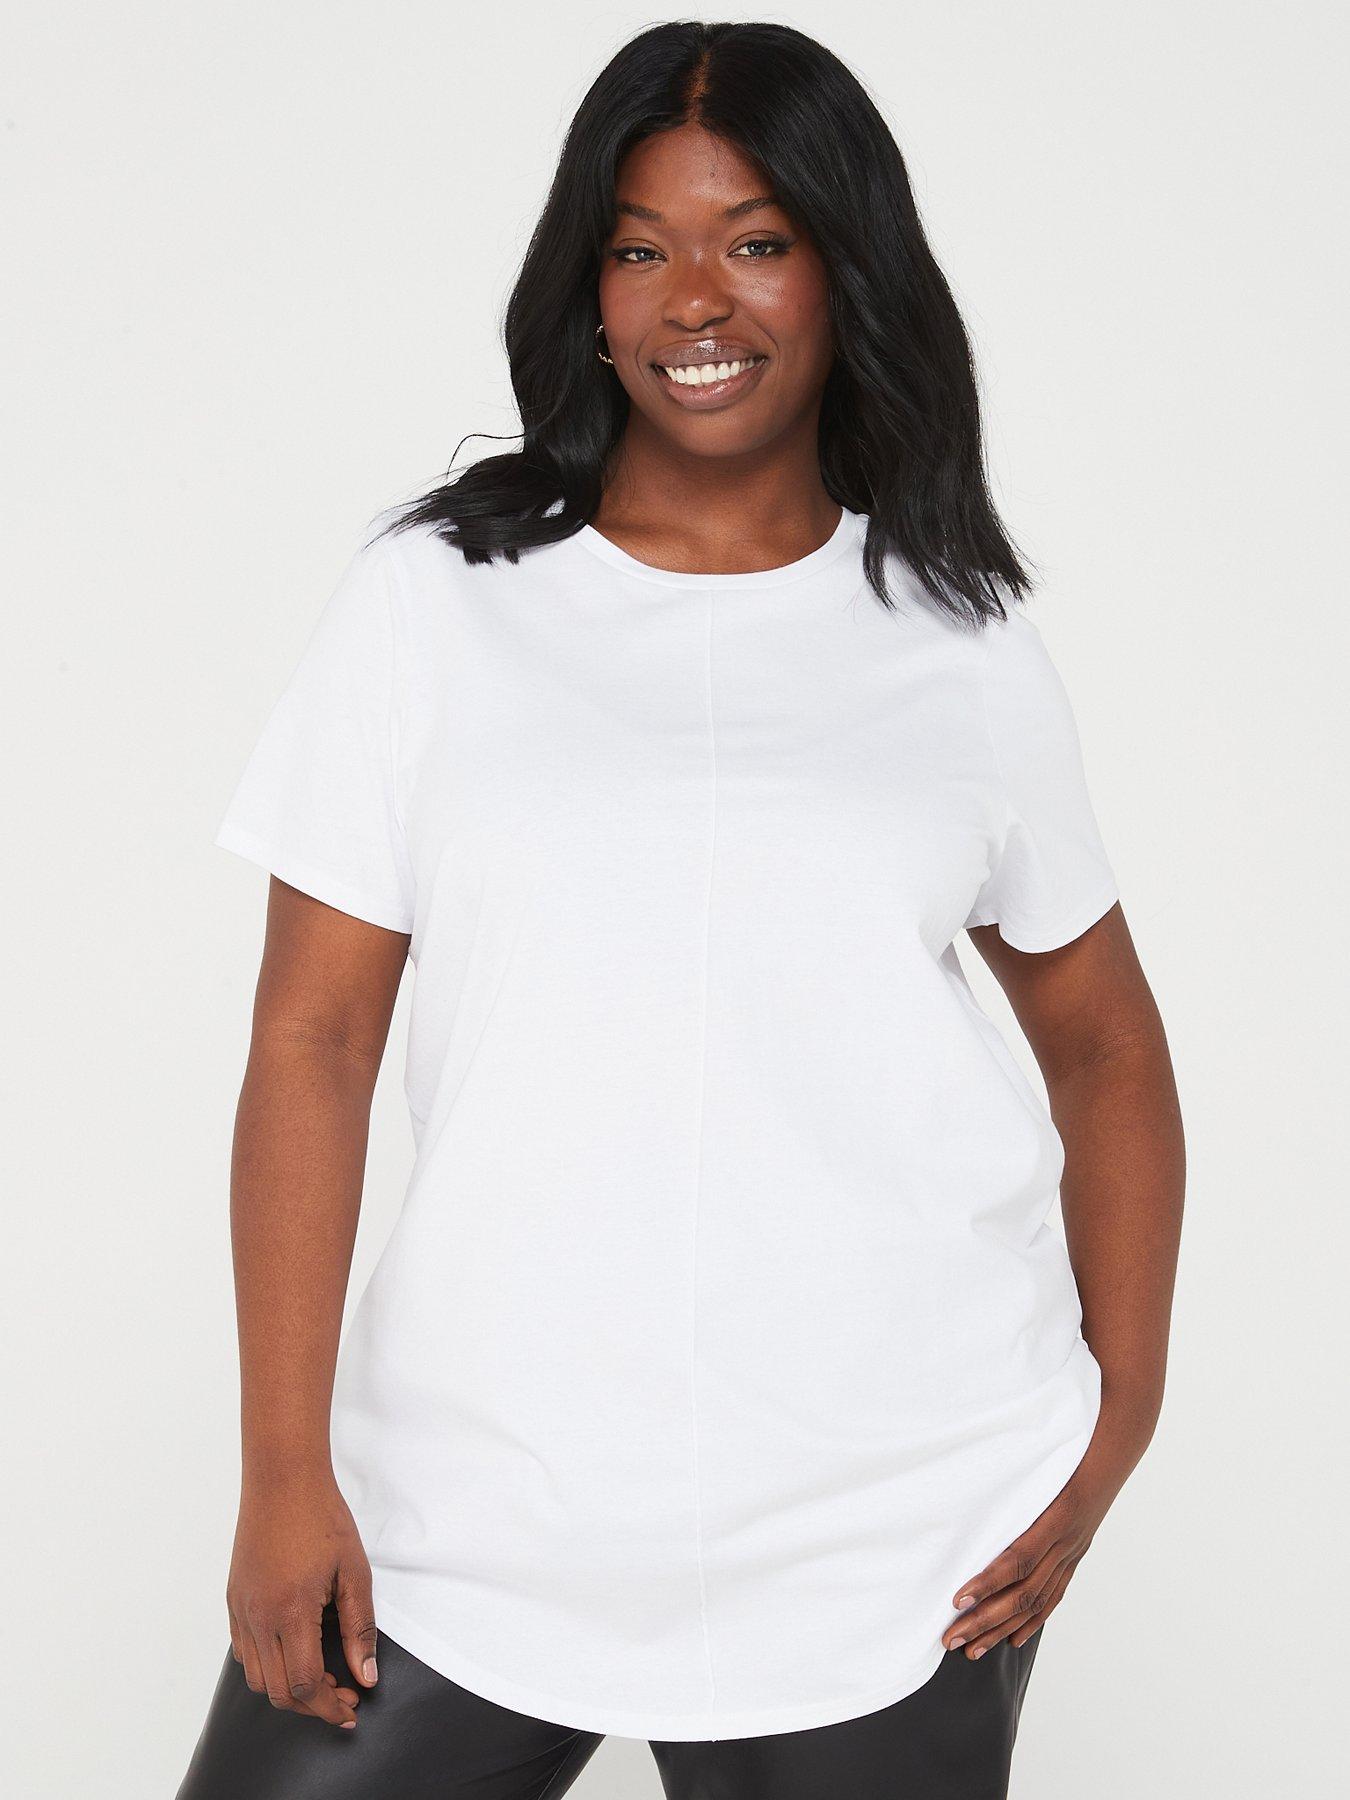 Plus Size Tops, Plus Size Tops for Women